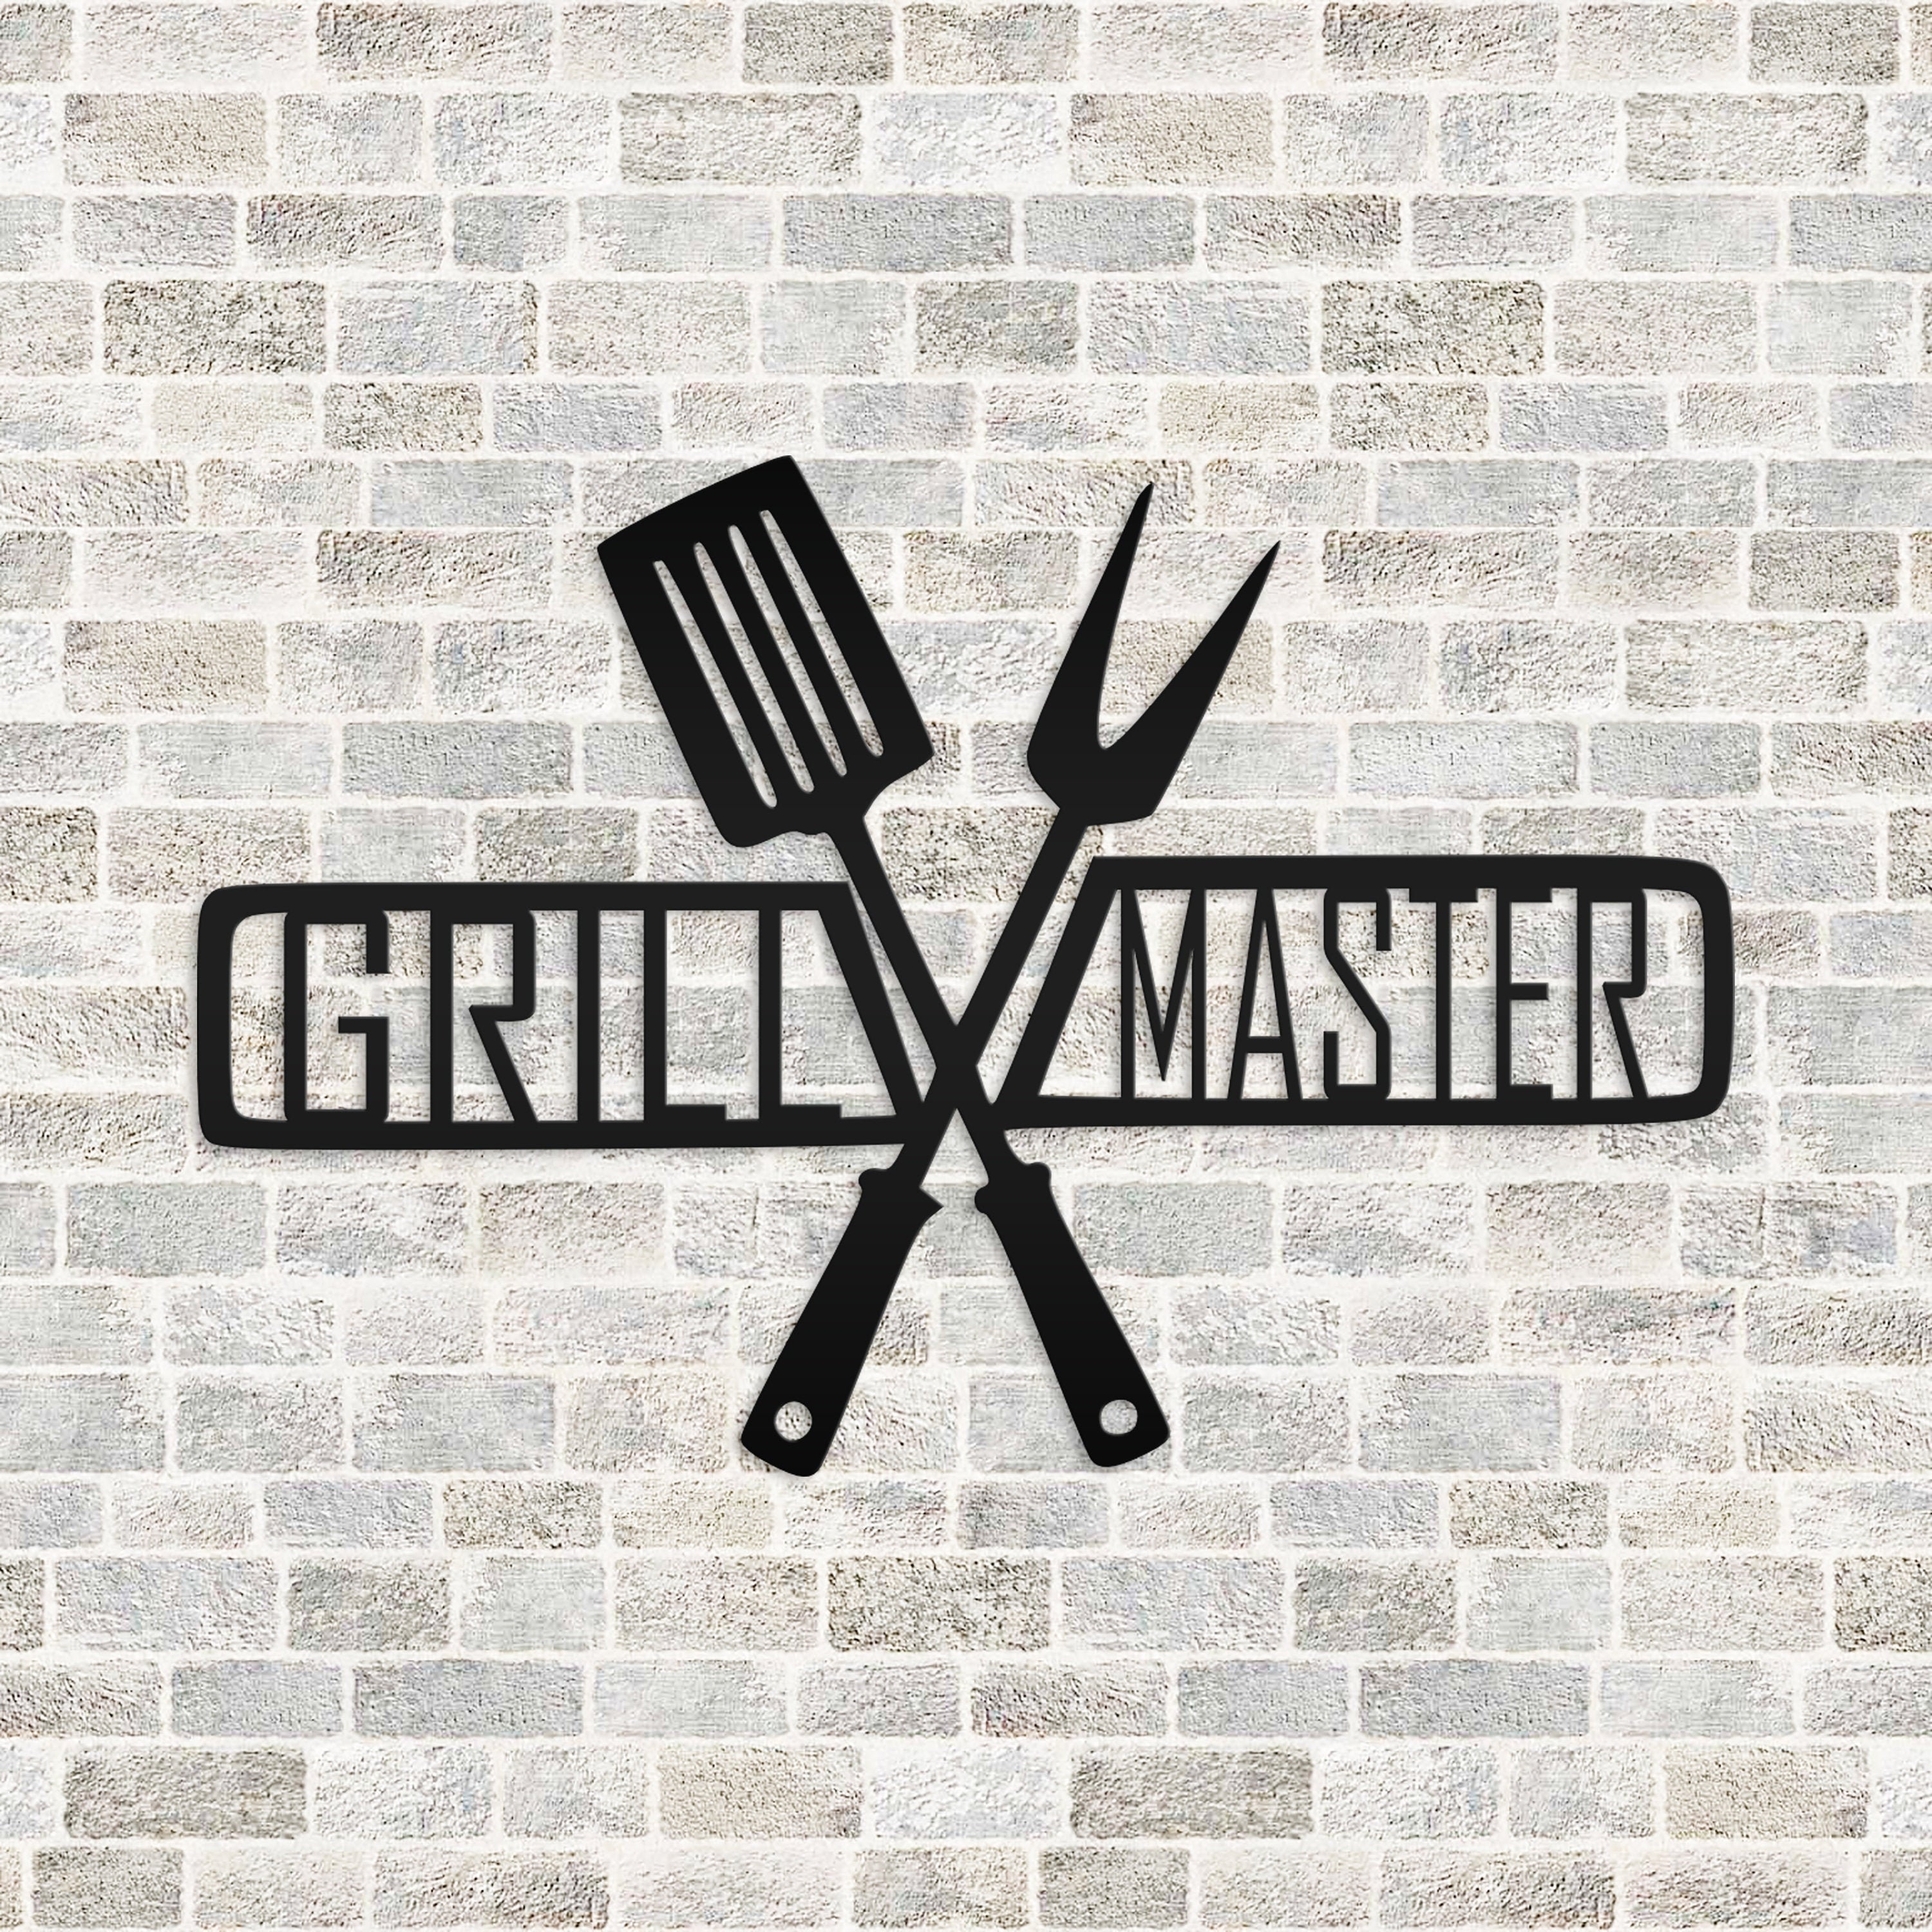 Novelty Metal Sign for the Grill Master